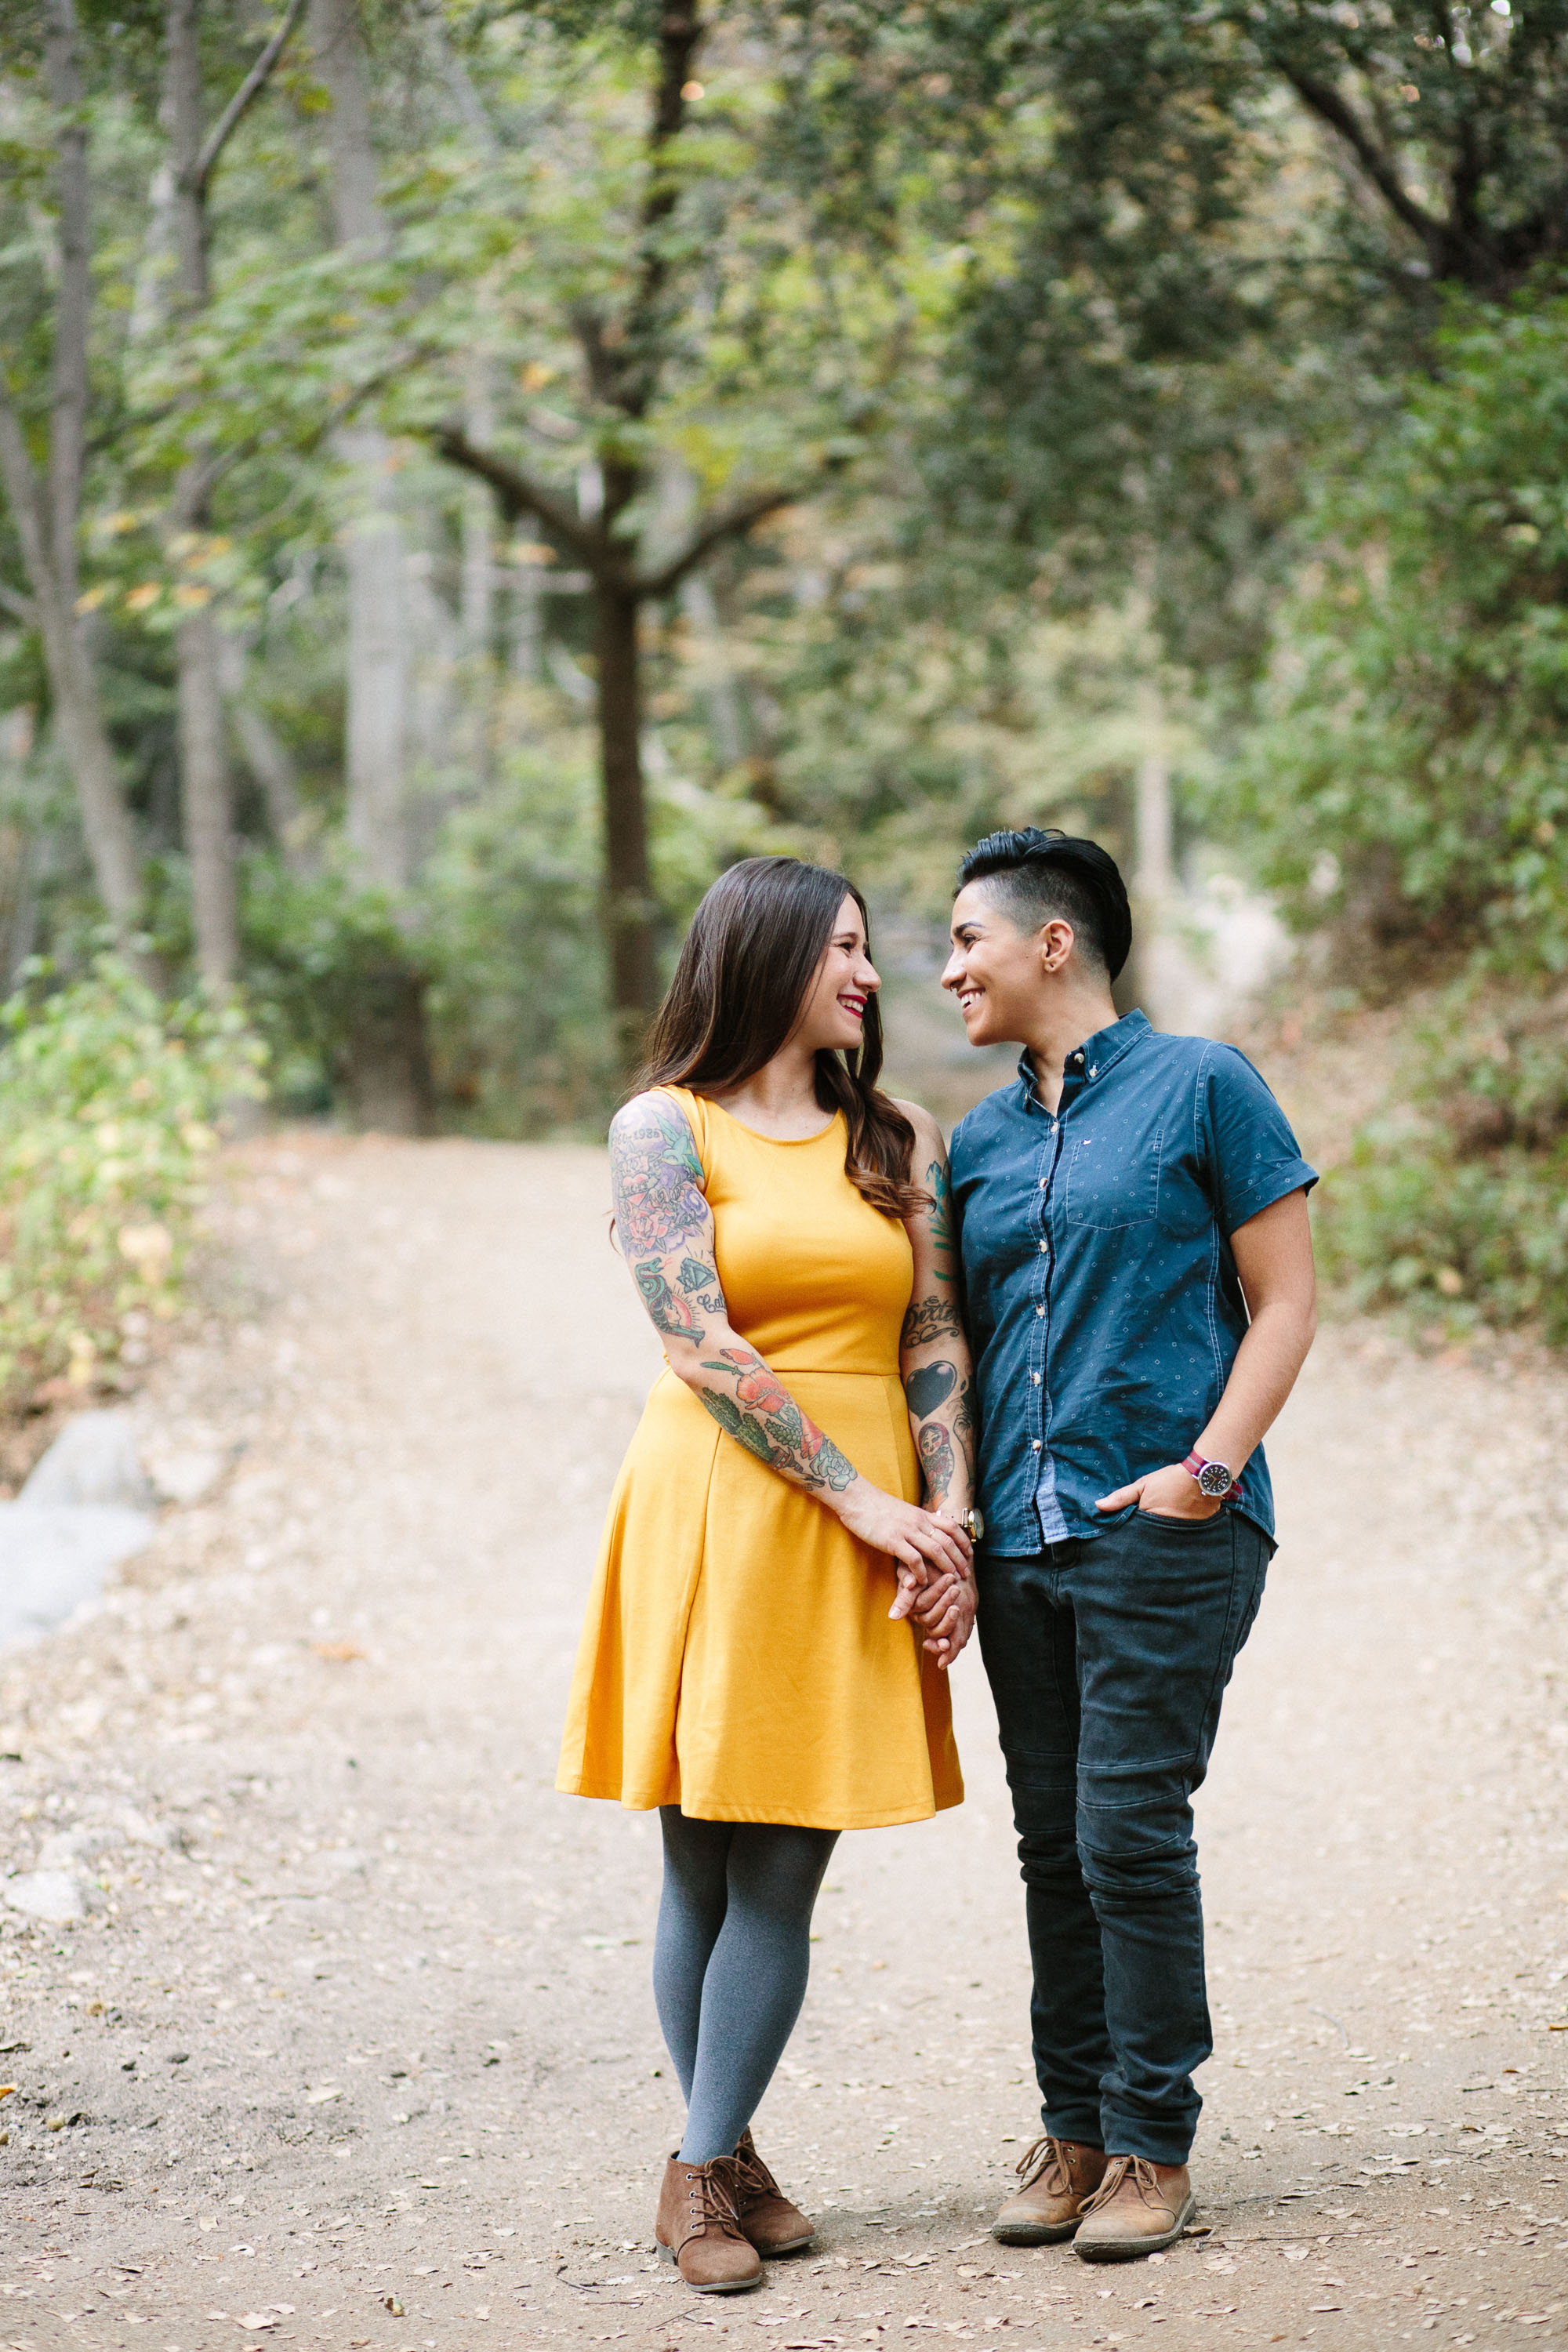 www-marycostaphotography-com-angeles-national-forest-engagement-0018